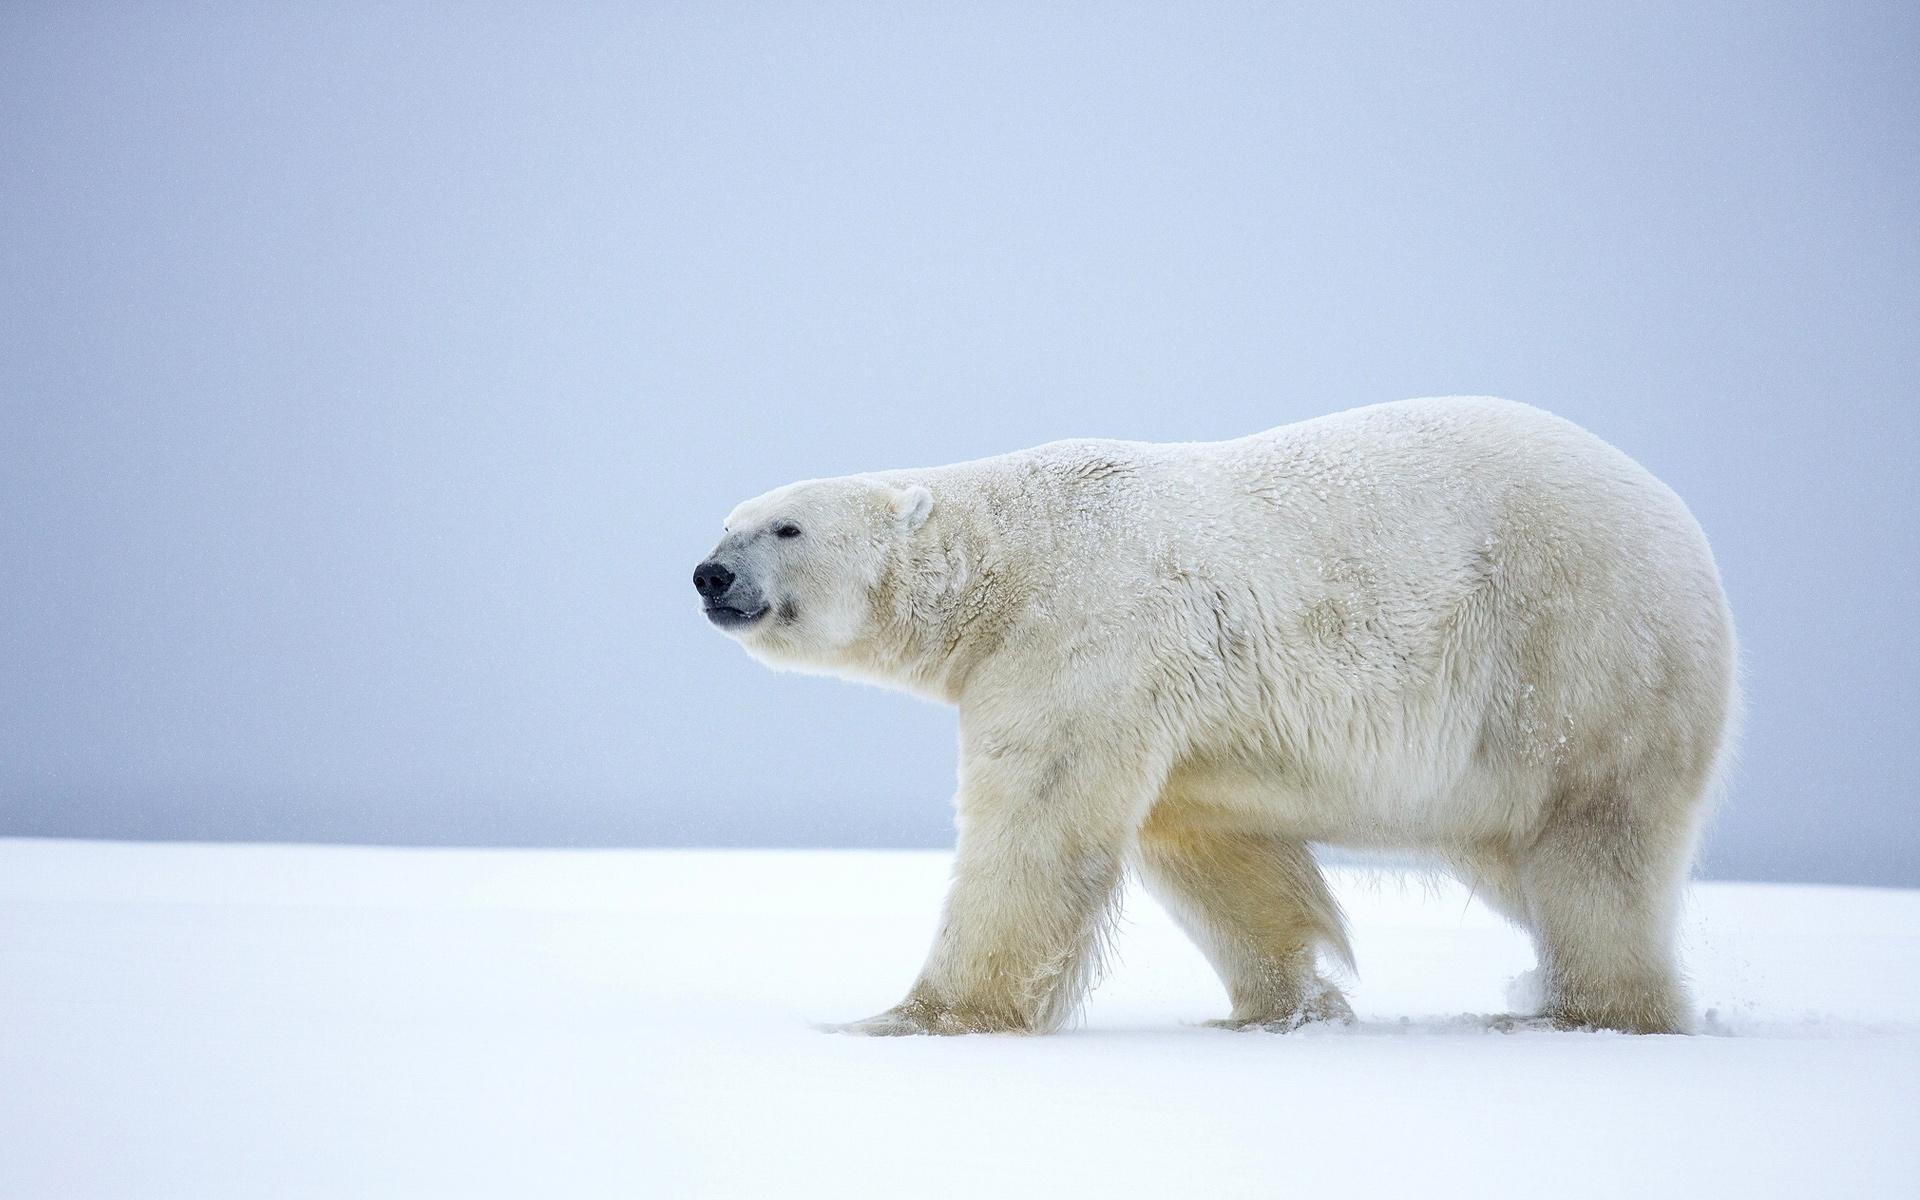 Polar bear Wallpaper HD, Desktop Background, Image and Picture